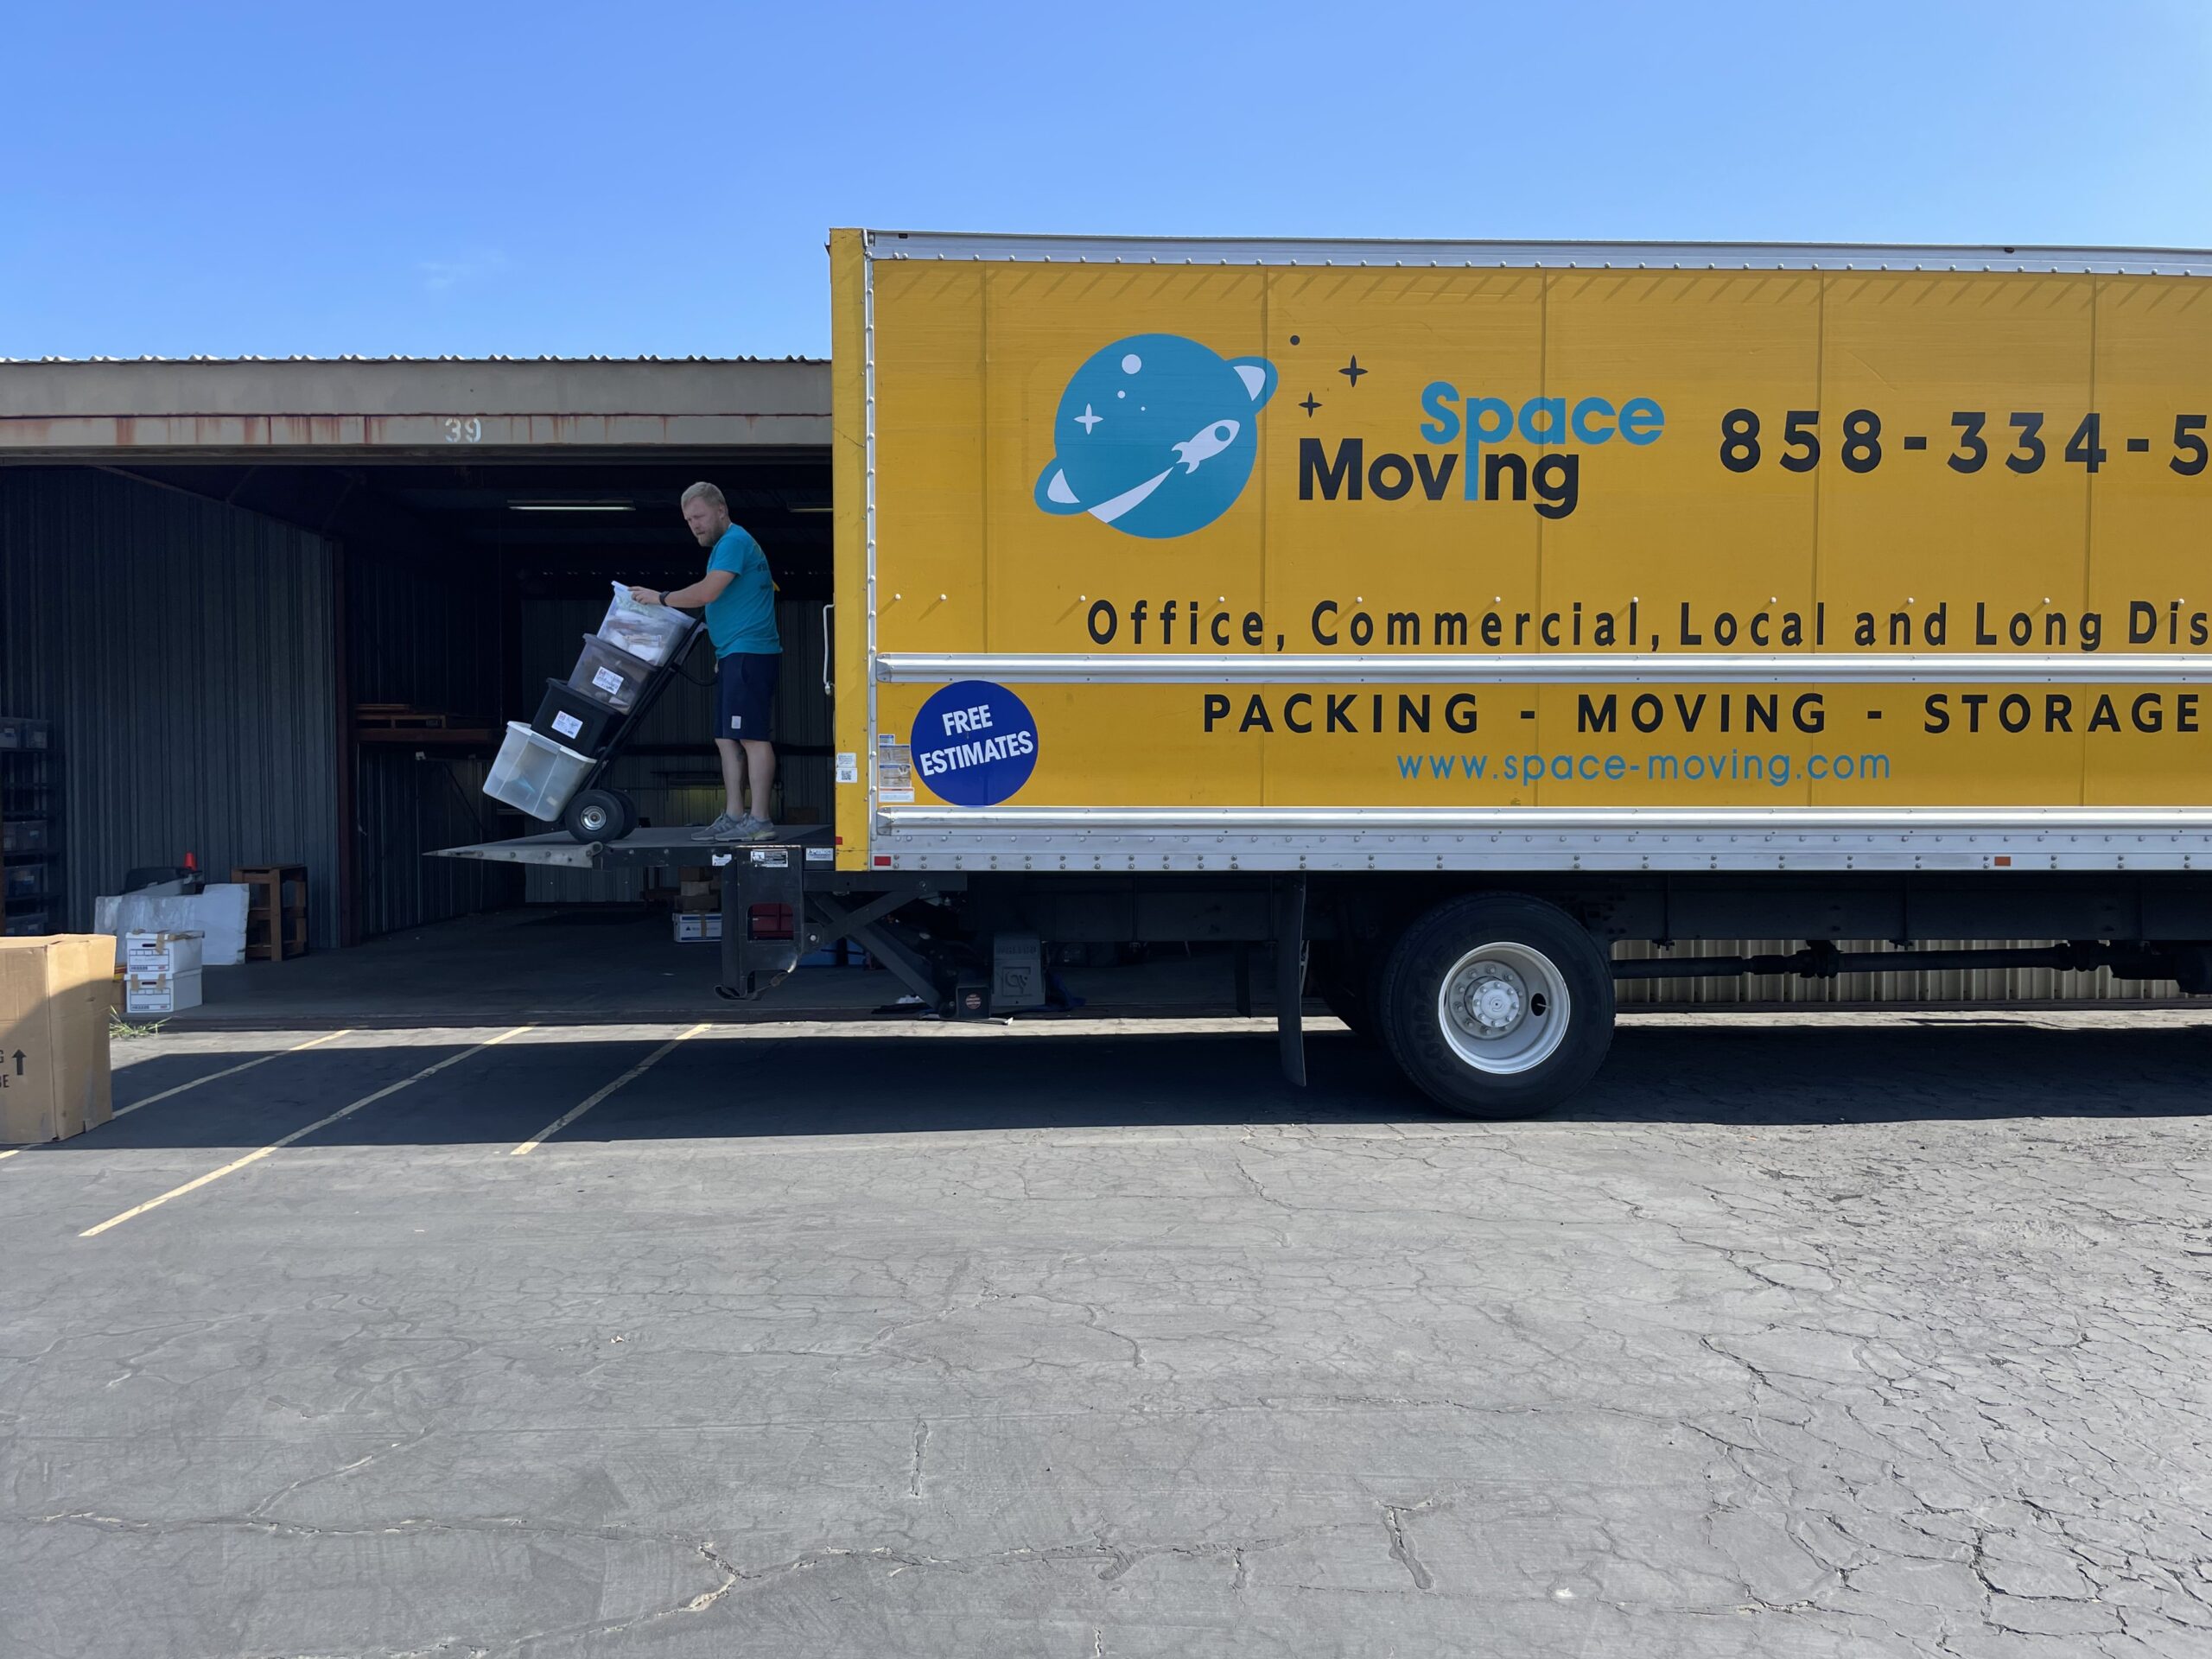 Ready to Move? San Diego’s Top-Rated Movers Are Here